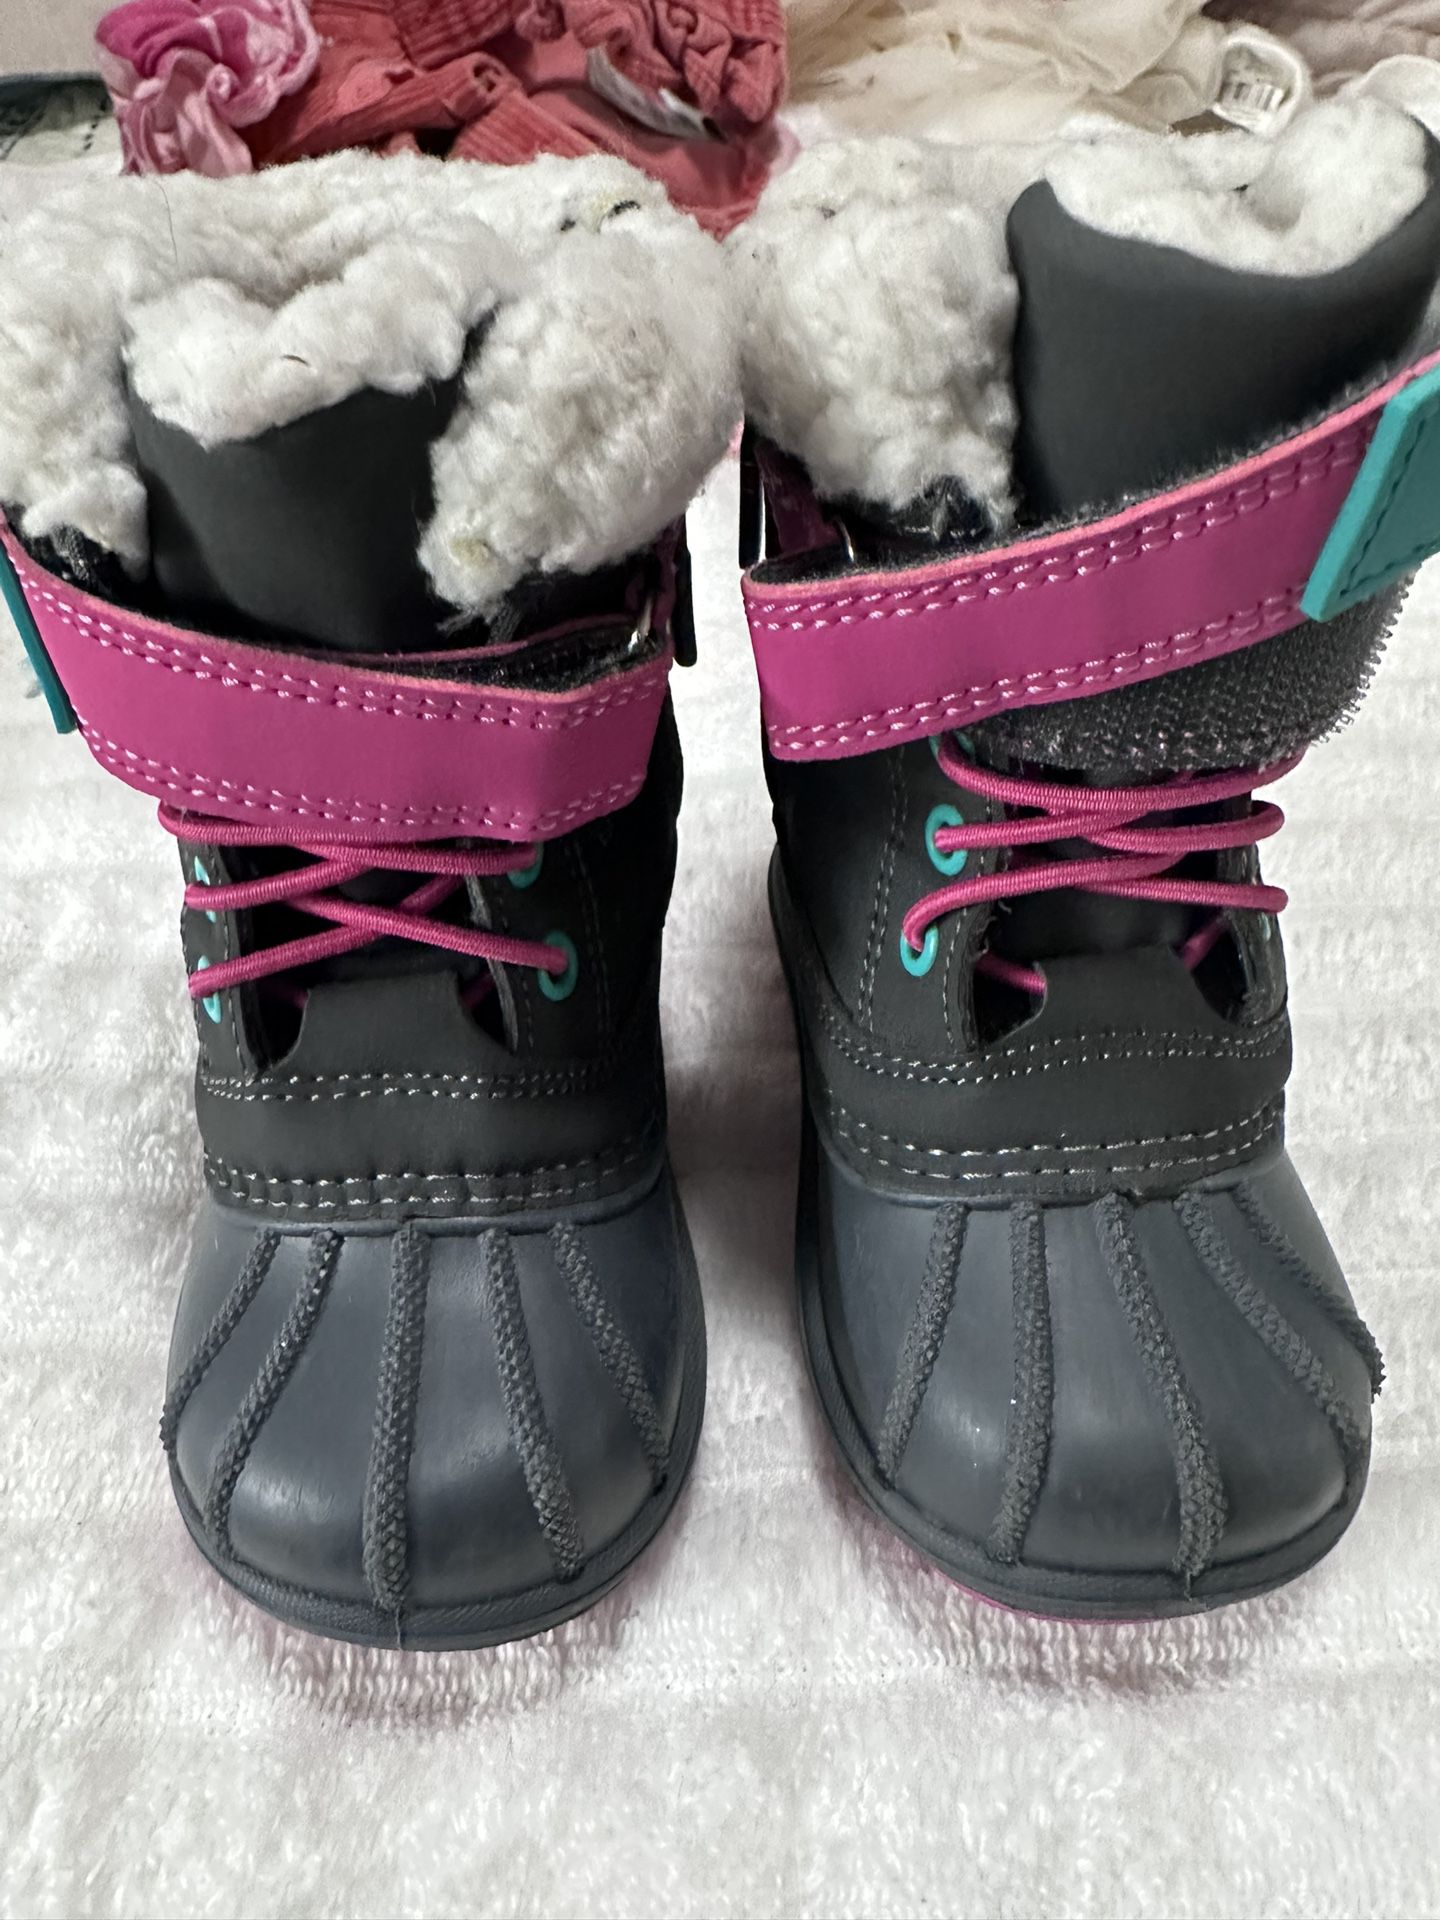 Snow Boots, Size T-5